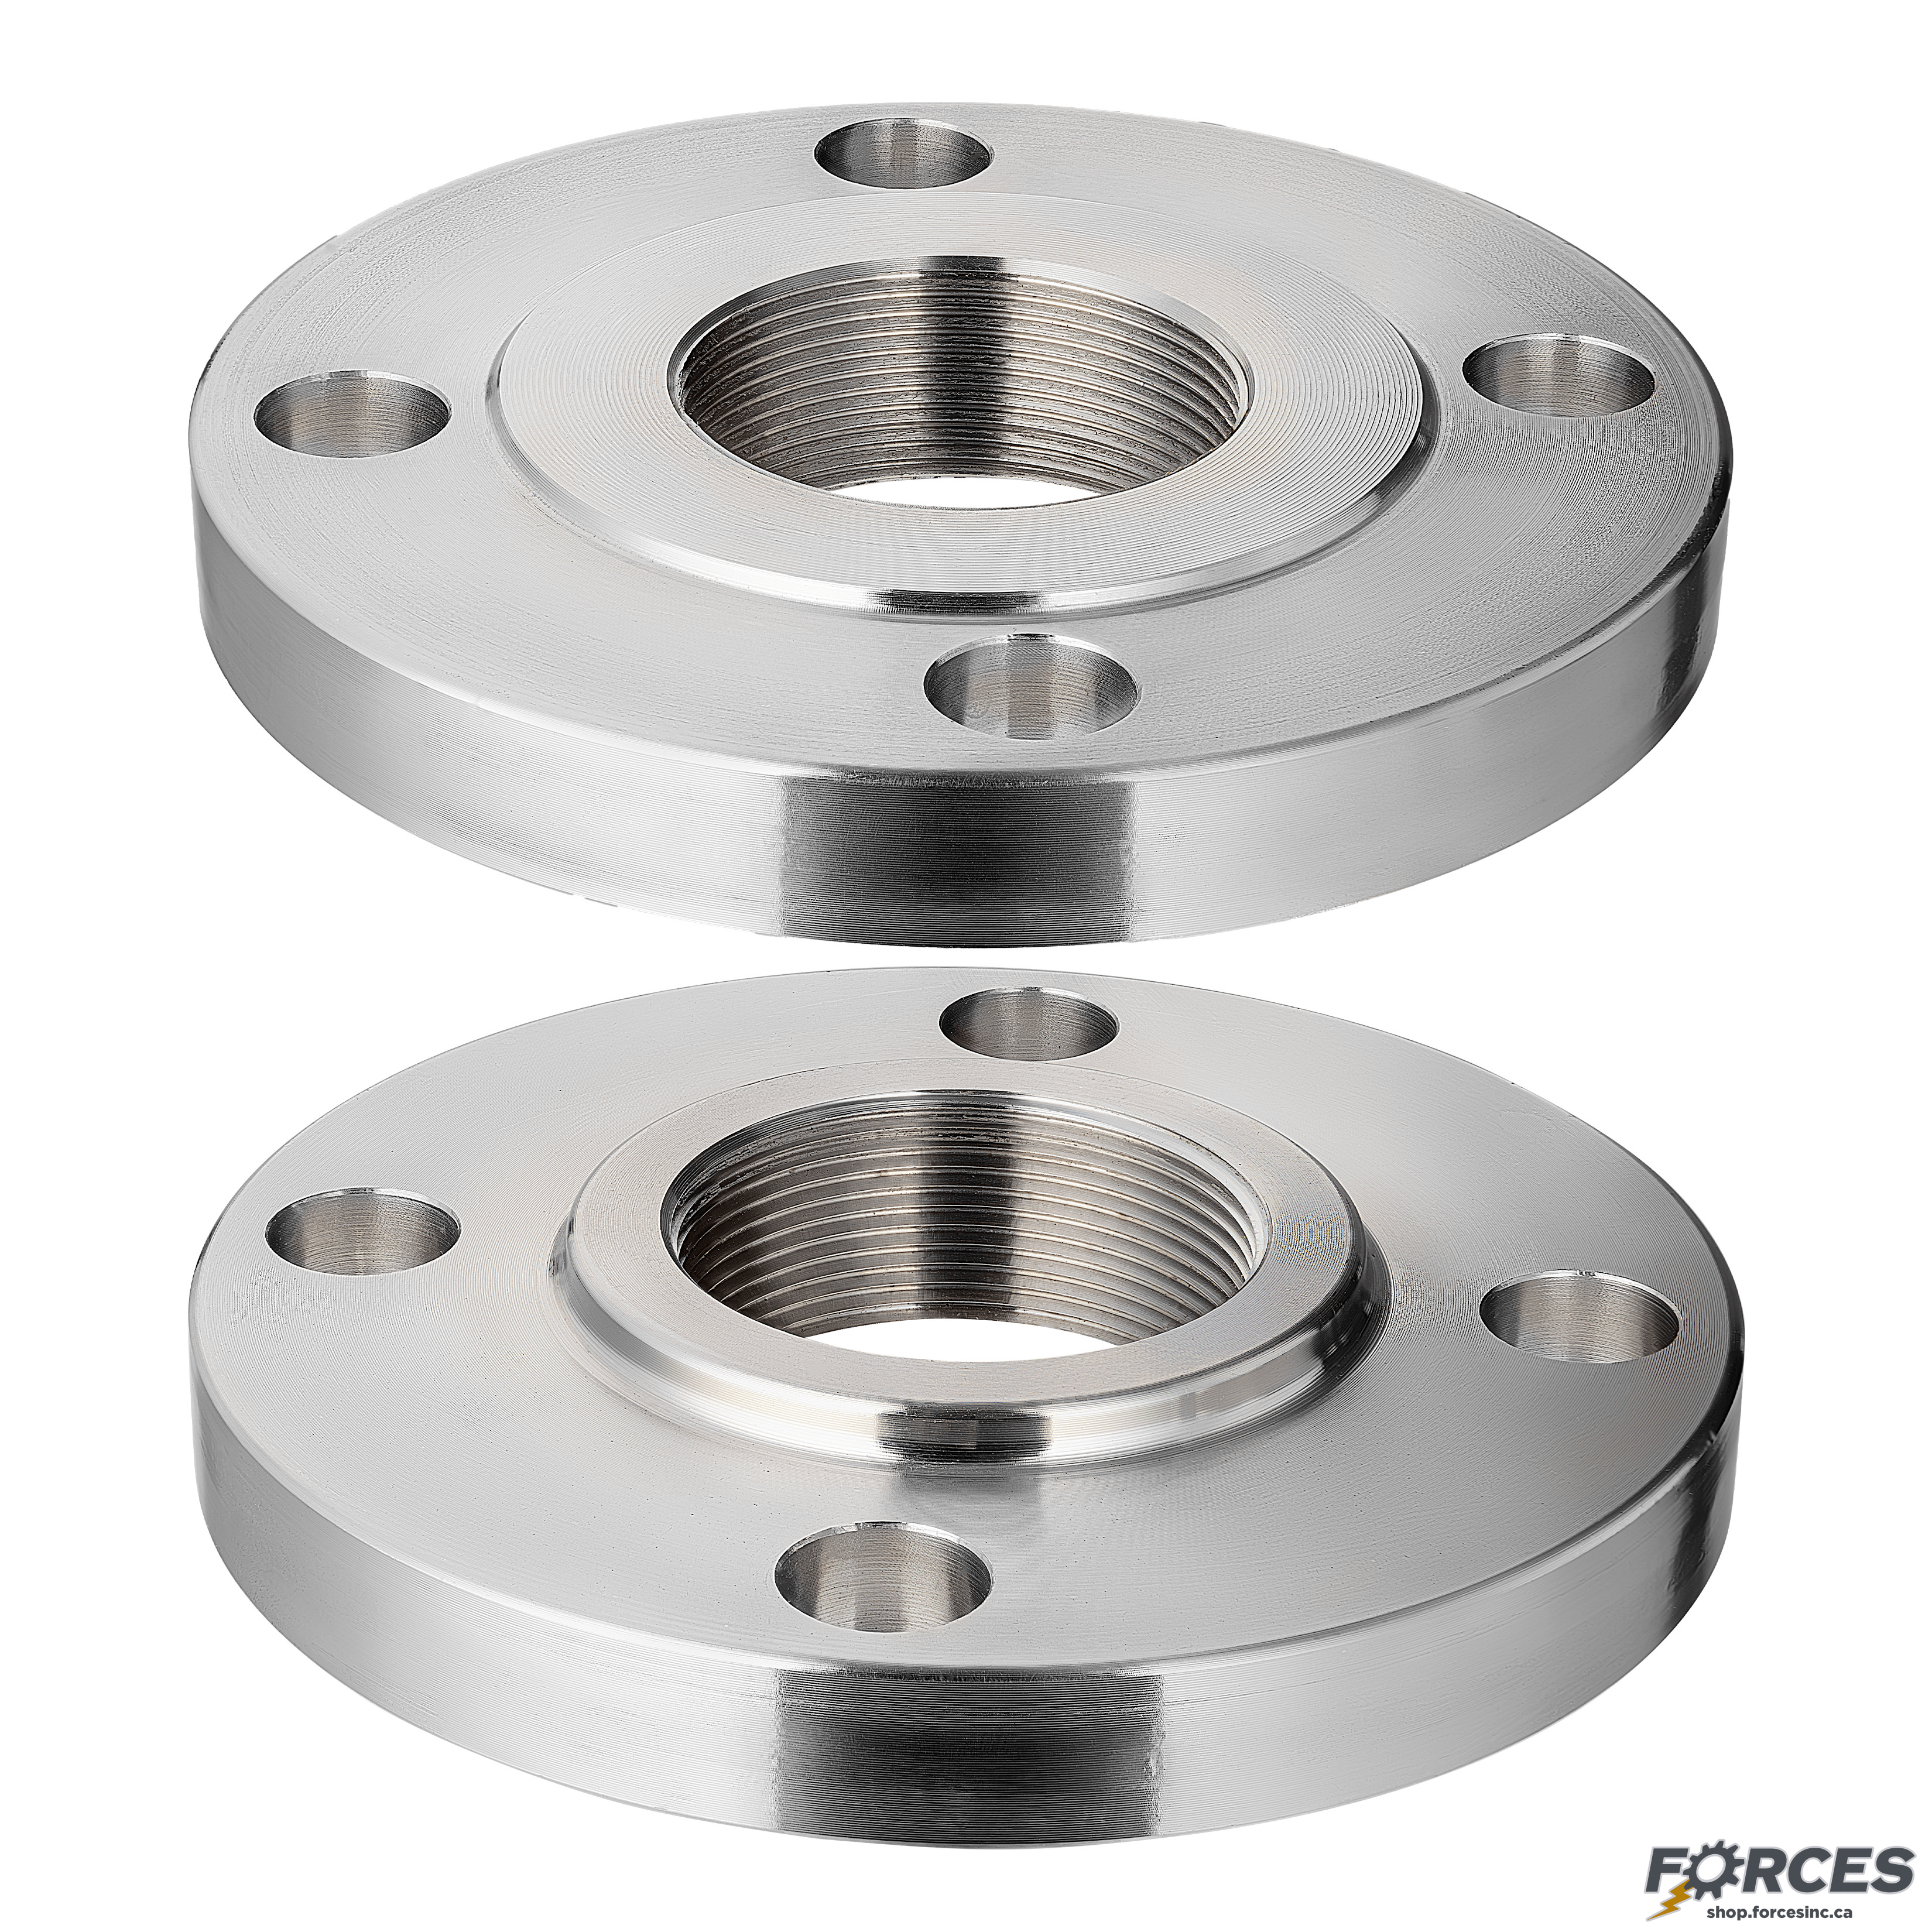 1/2" Threaded Flange NPT Class #150 - Stainless Steel 304 - Forces Inc